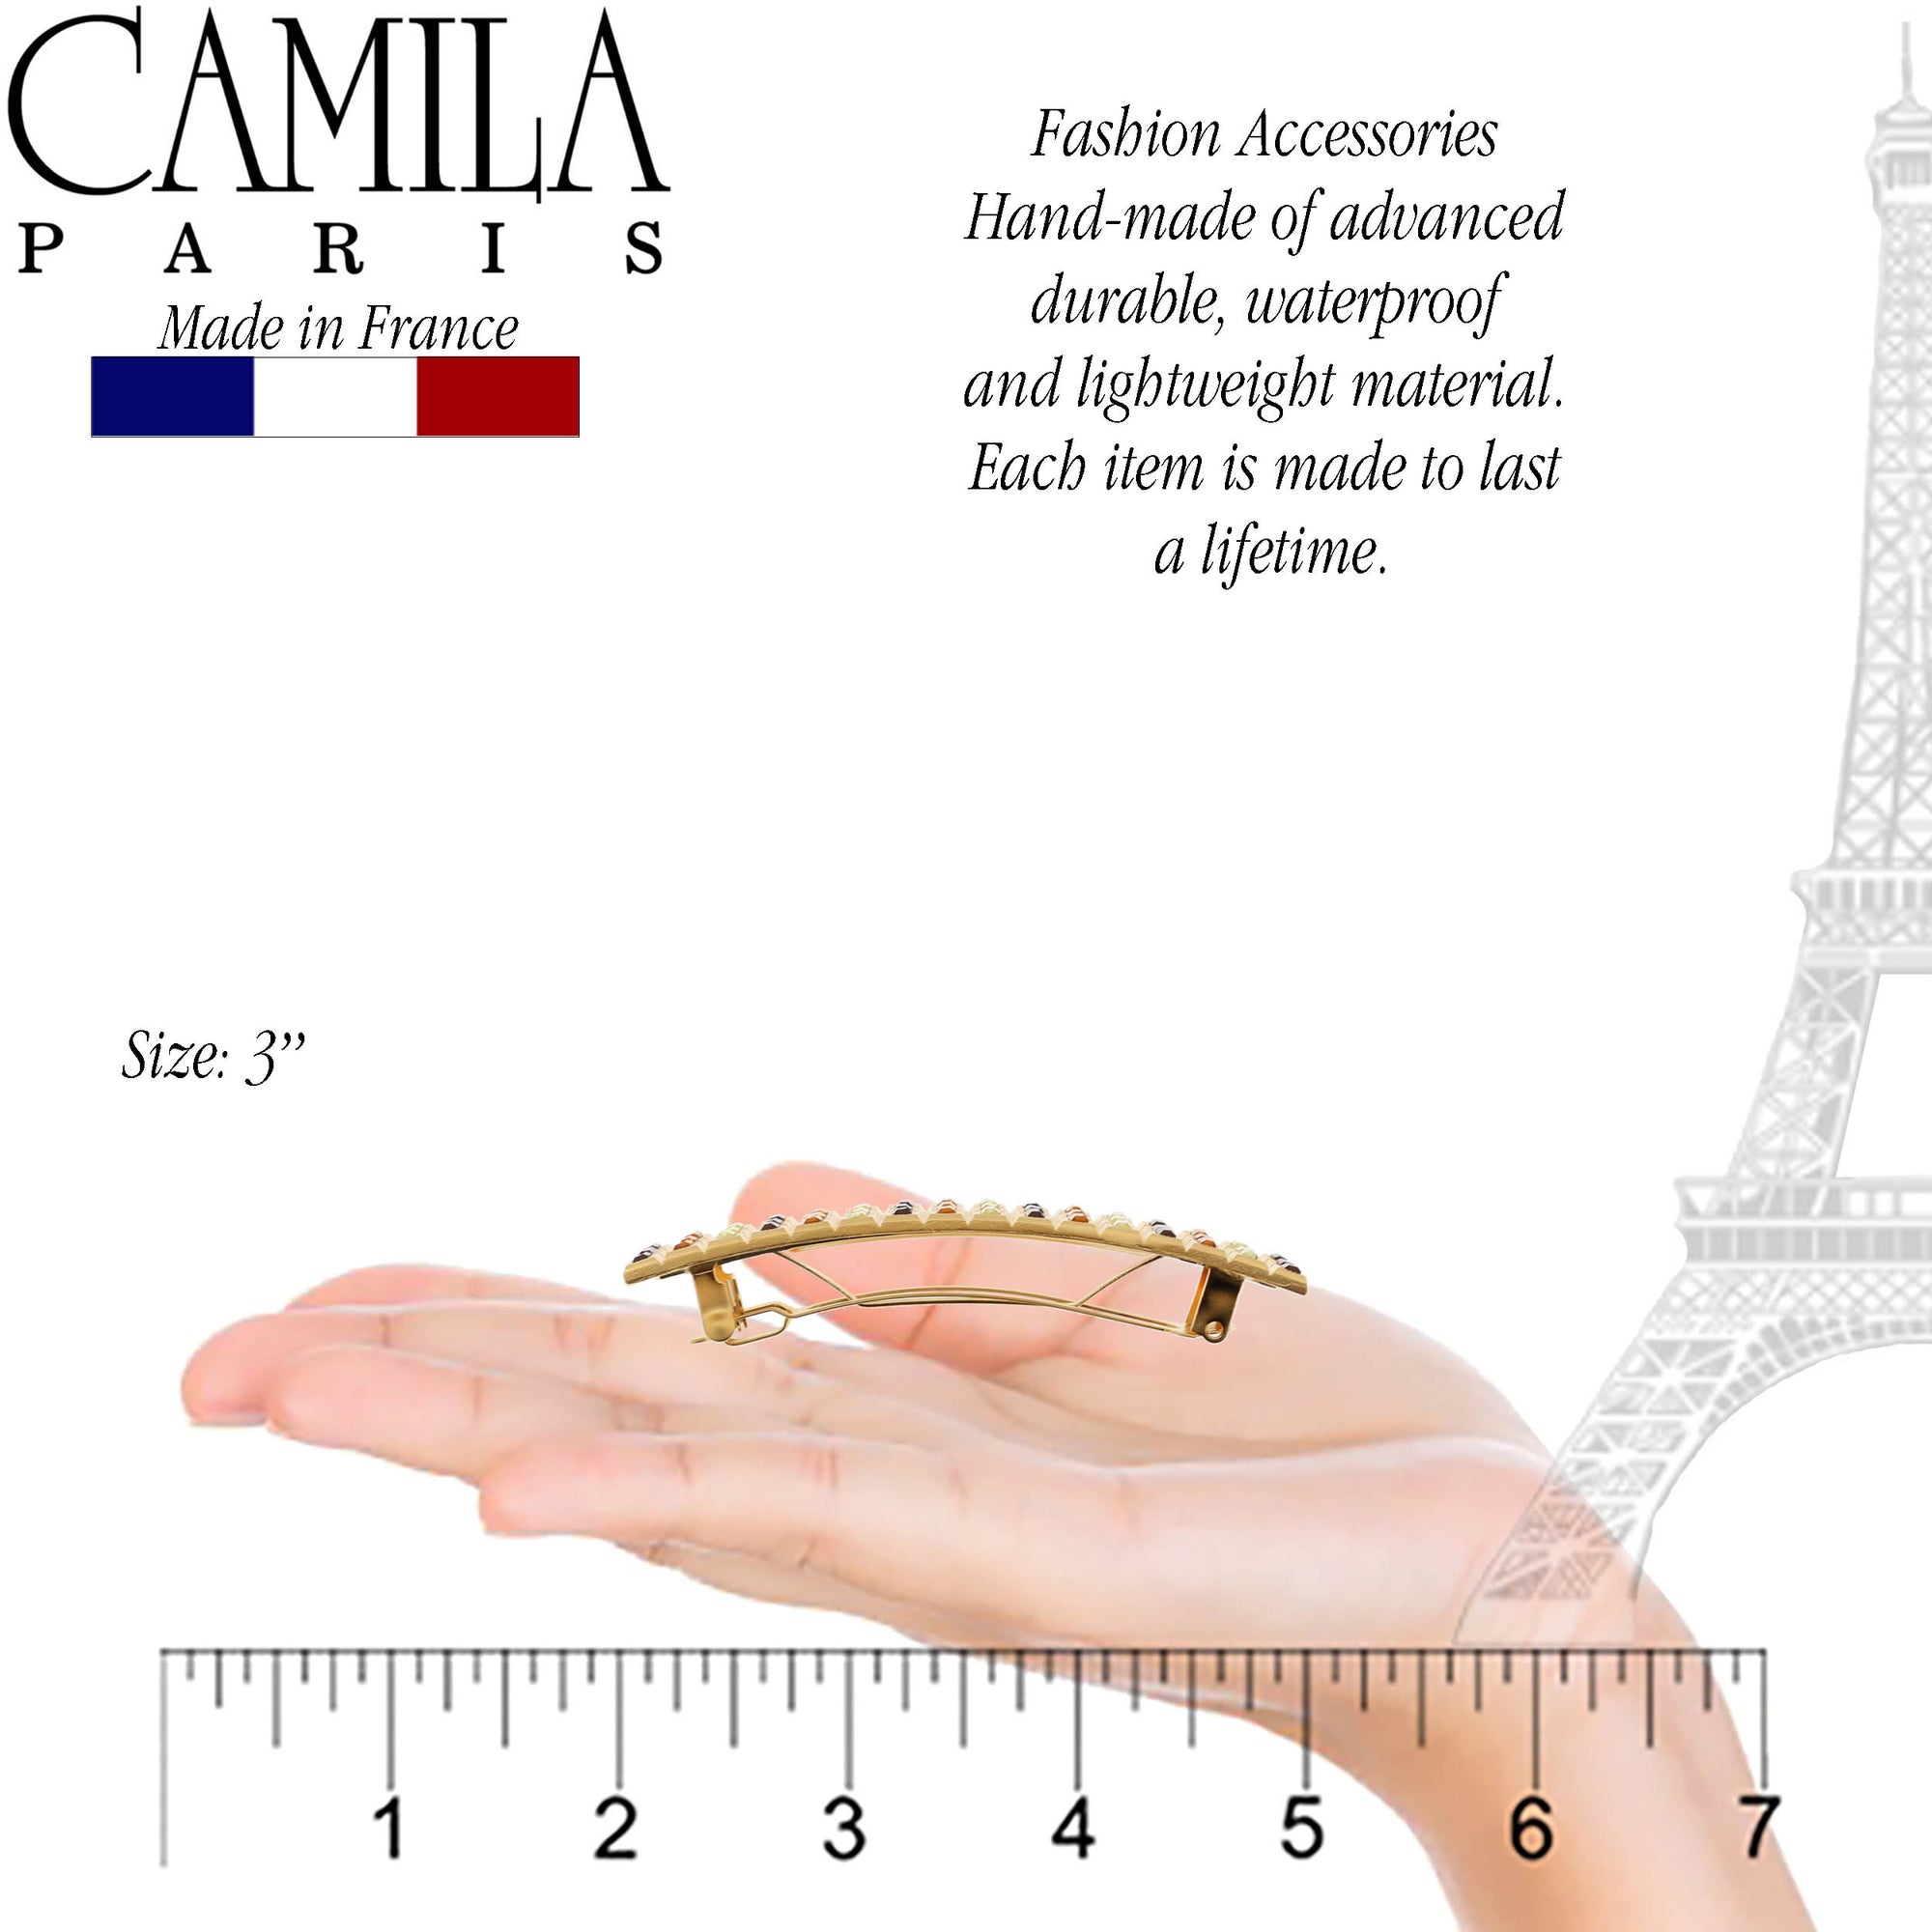 Camila Paris GA259 3 Inch Rectangular Hair Barrette Clip Metal Gold, French Hair Accessories for Women, Handmade with Swarovski Crystals Stones. Styling Girls Hair Ornaments. Made in France